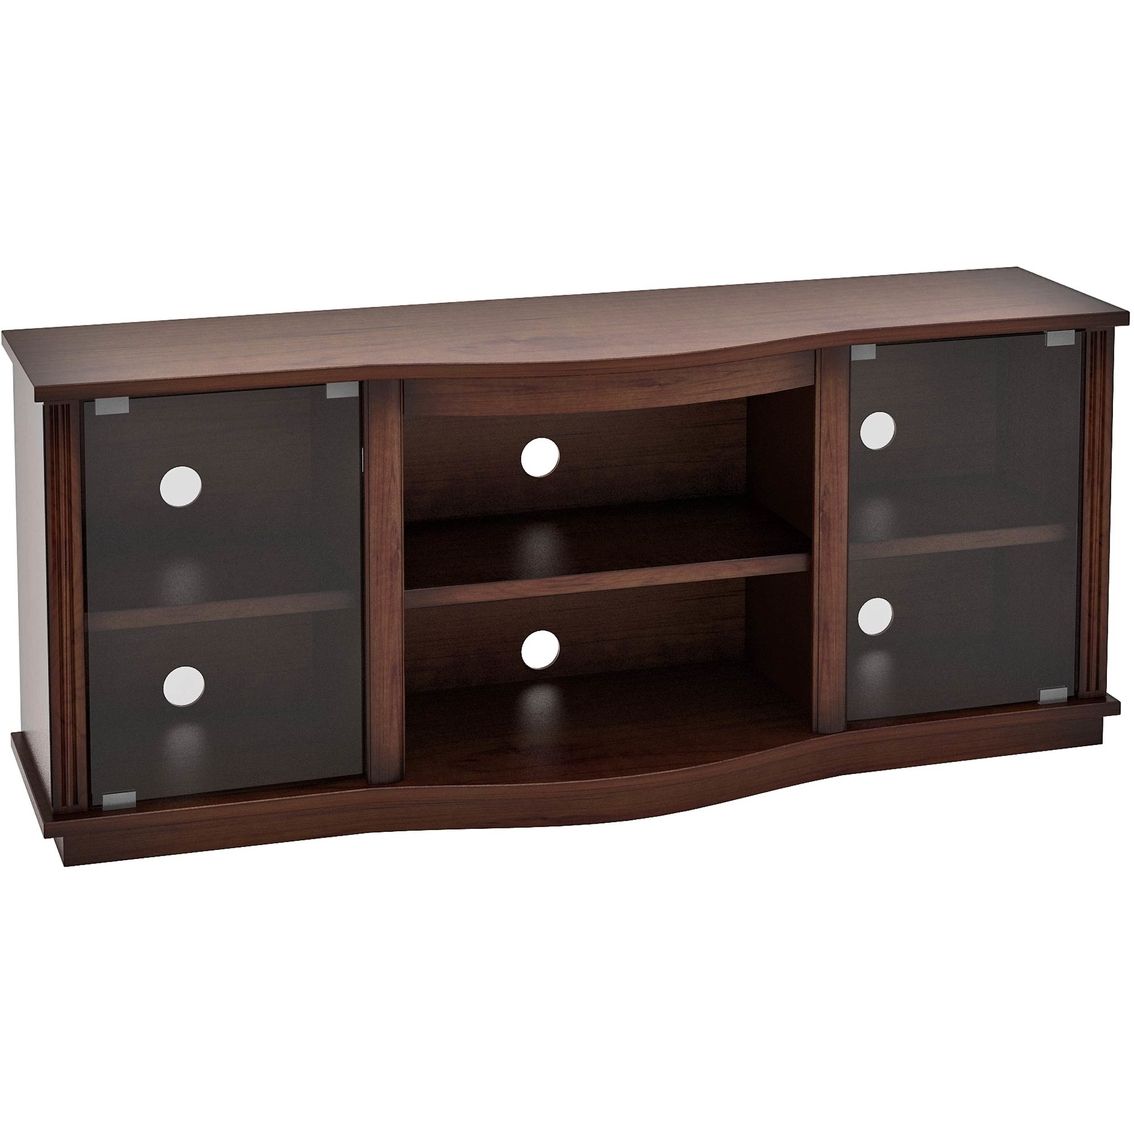 Tall Skinny Tv Stands For Well Known Tv Stands And Entertainment Centers : Large Screen Tv Stands (View 18 of 20)